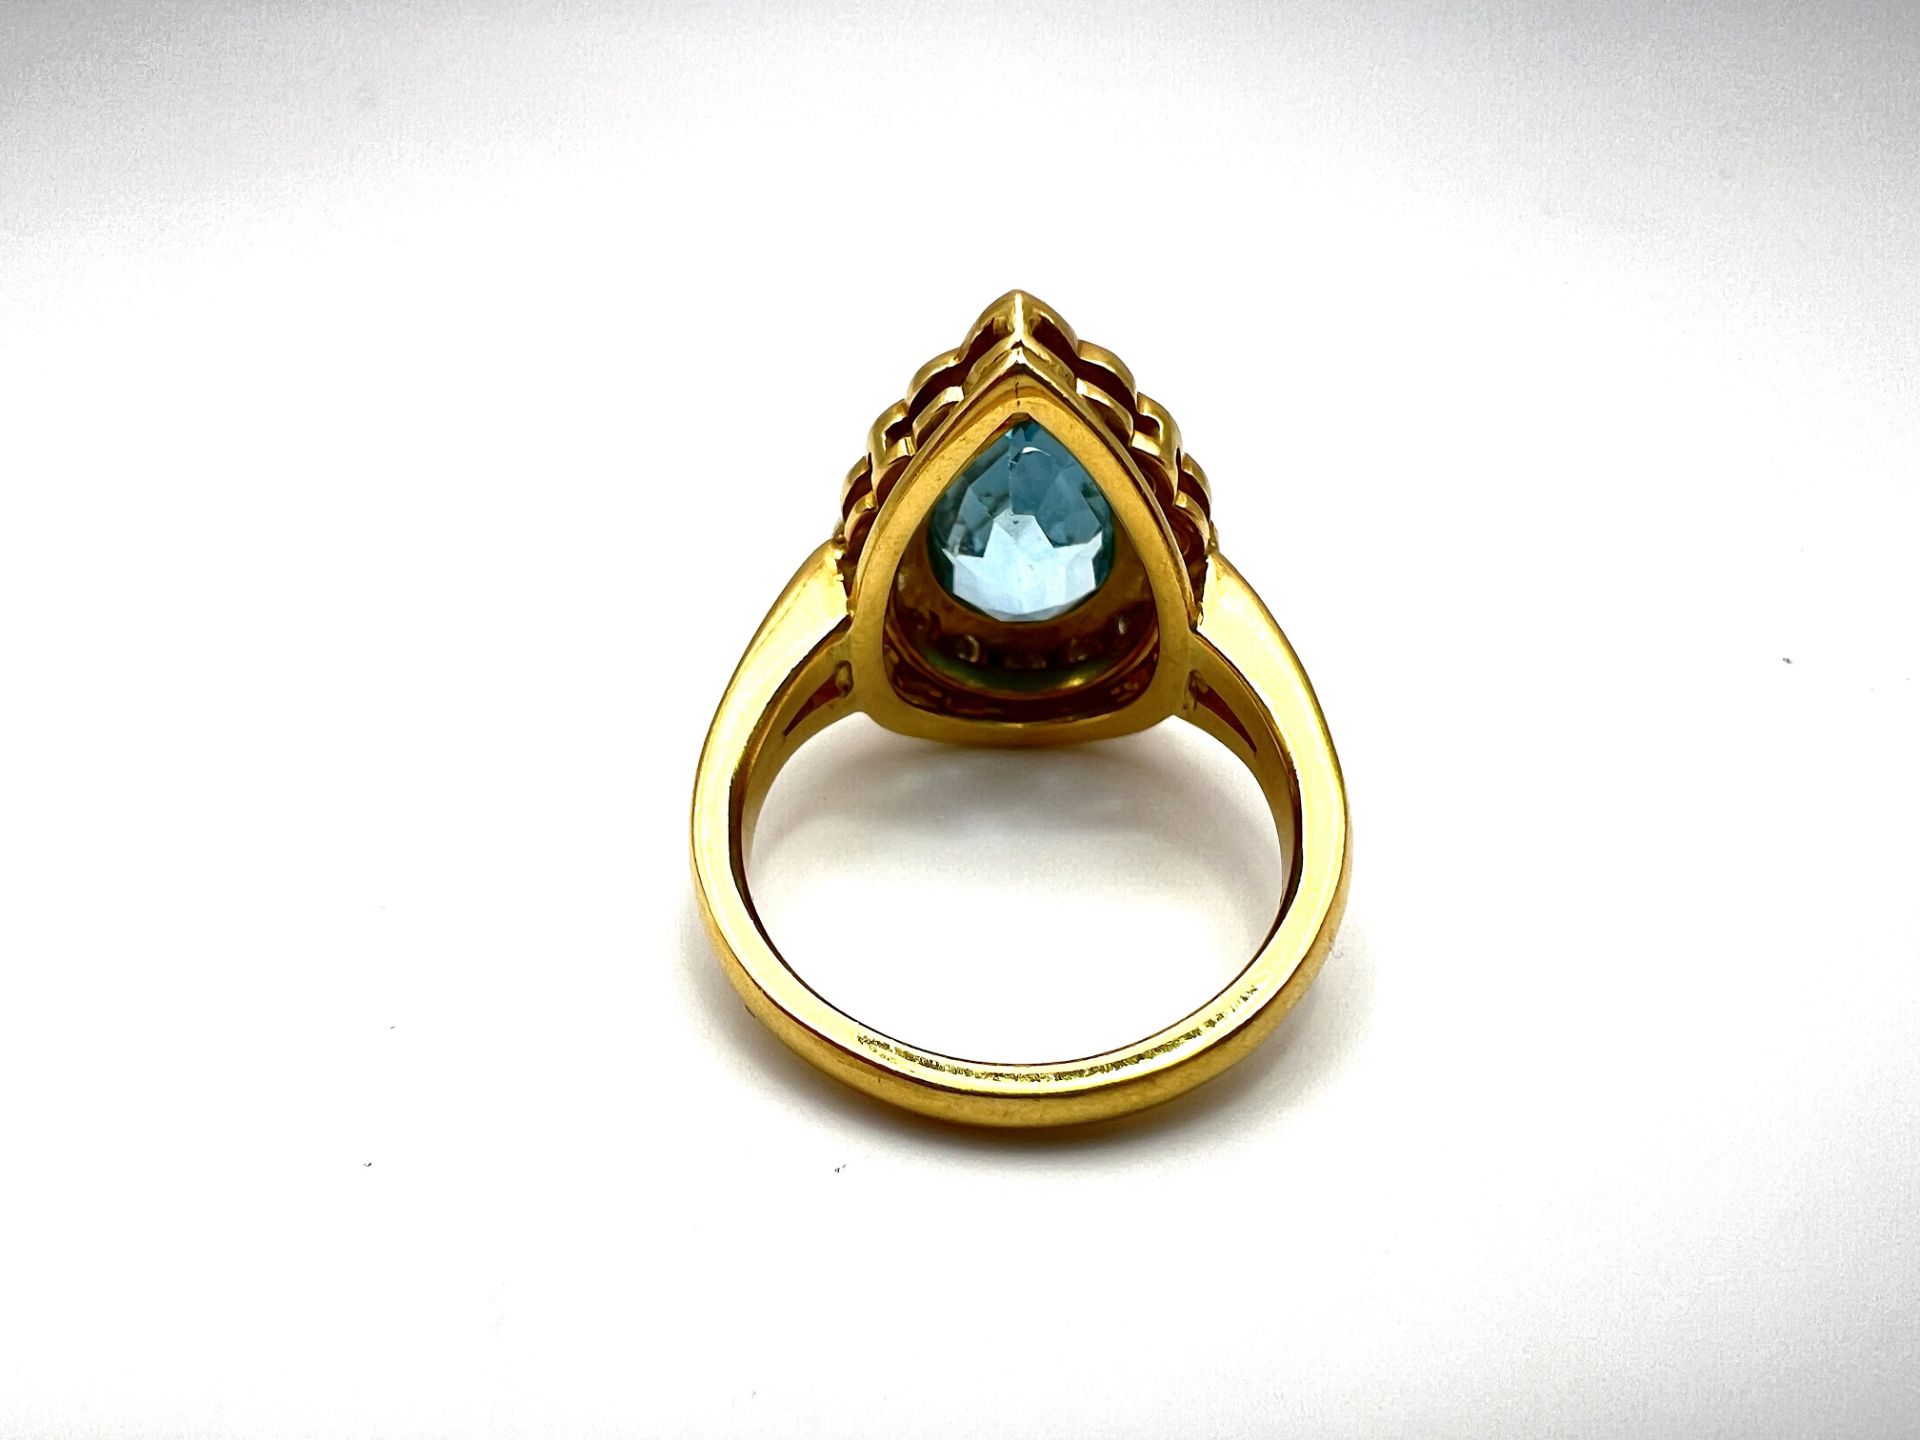 Diamond ring with blue topaz - Image 4 of 6